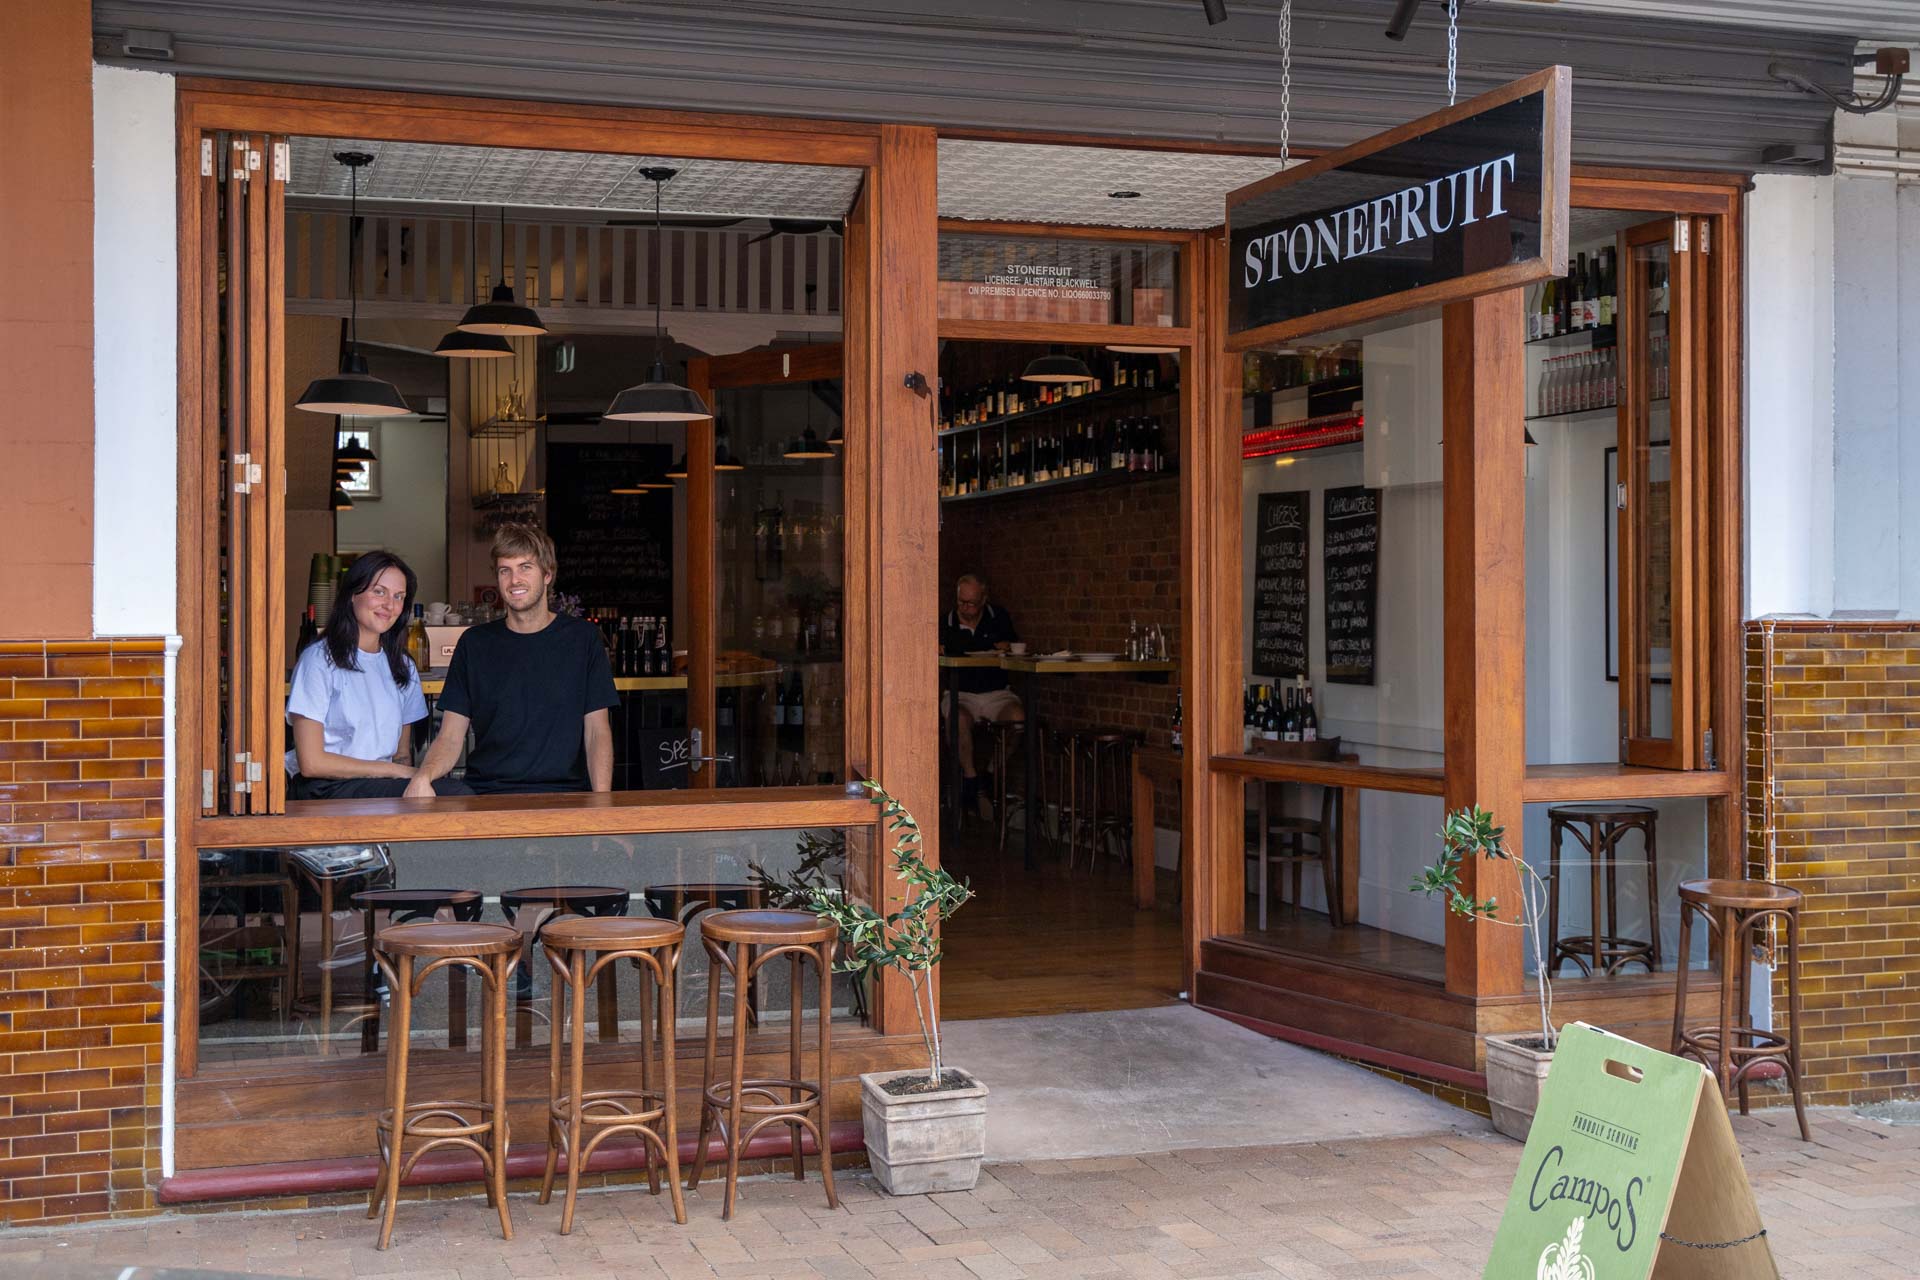 A Weekend in Tenterfield: Where to Stay, Adventure, and Eat, constance allan, stonefruit restaurant, tables